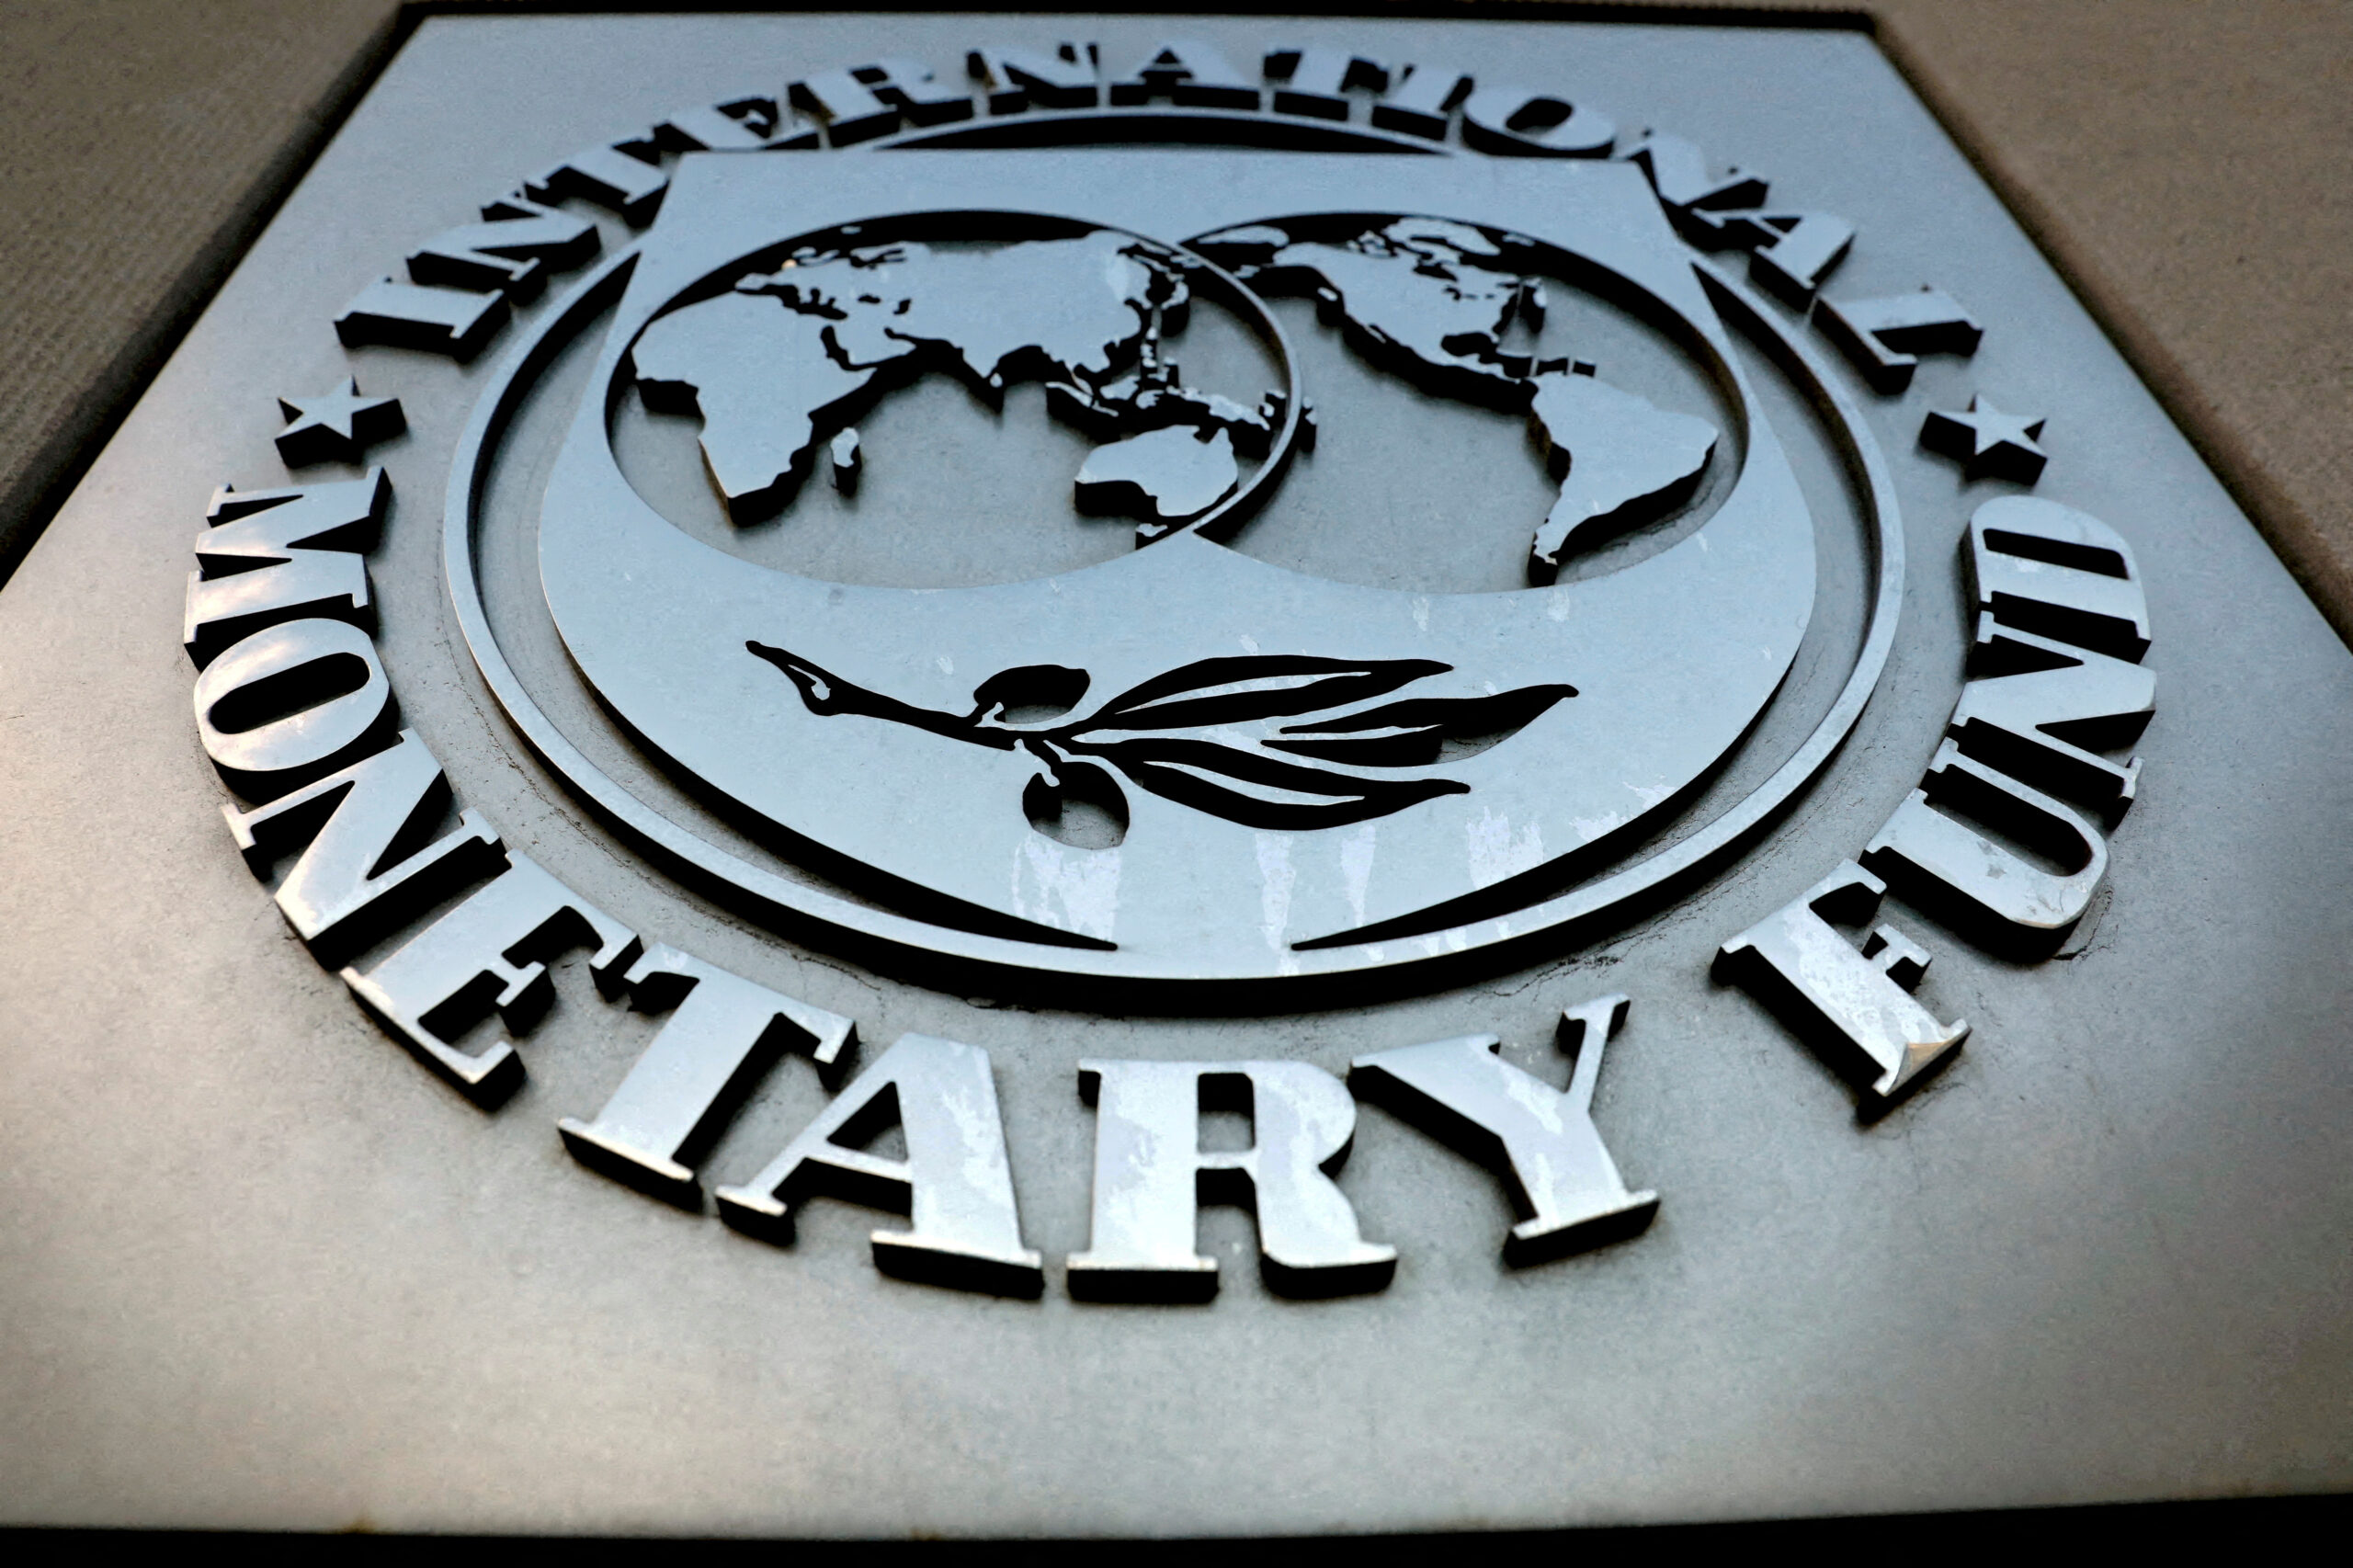 Argentina to take US$1 billion loan to pay the IMF